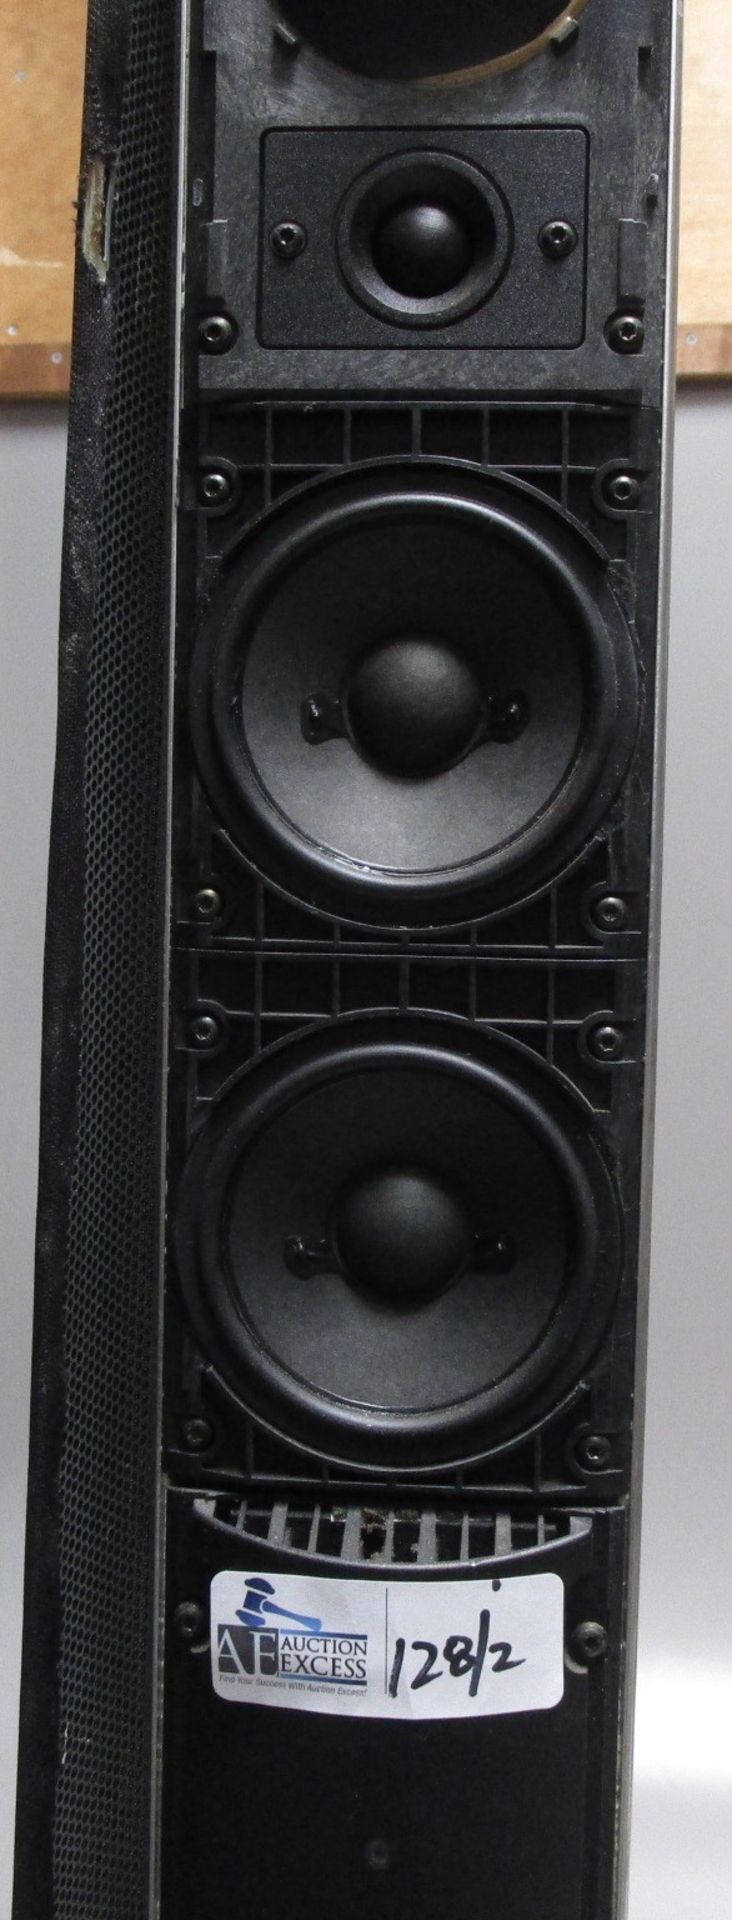 LOT OF 2 BANG & OLUFSEN MCMXC11 SPEAKERS TESTED AND WORKING - Image 3 of 5